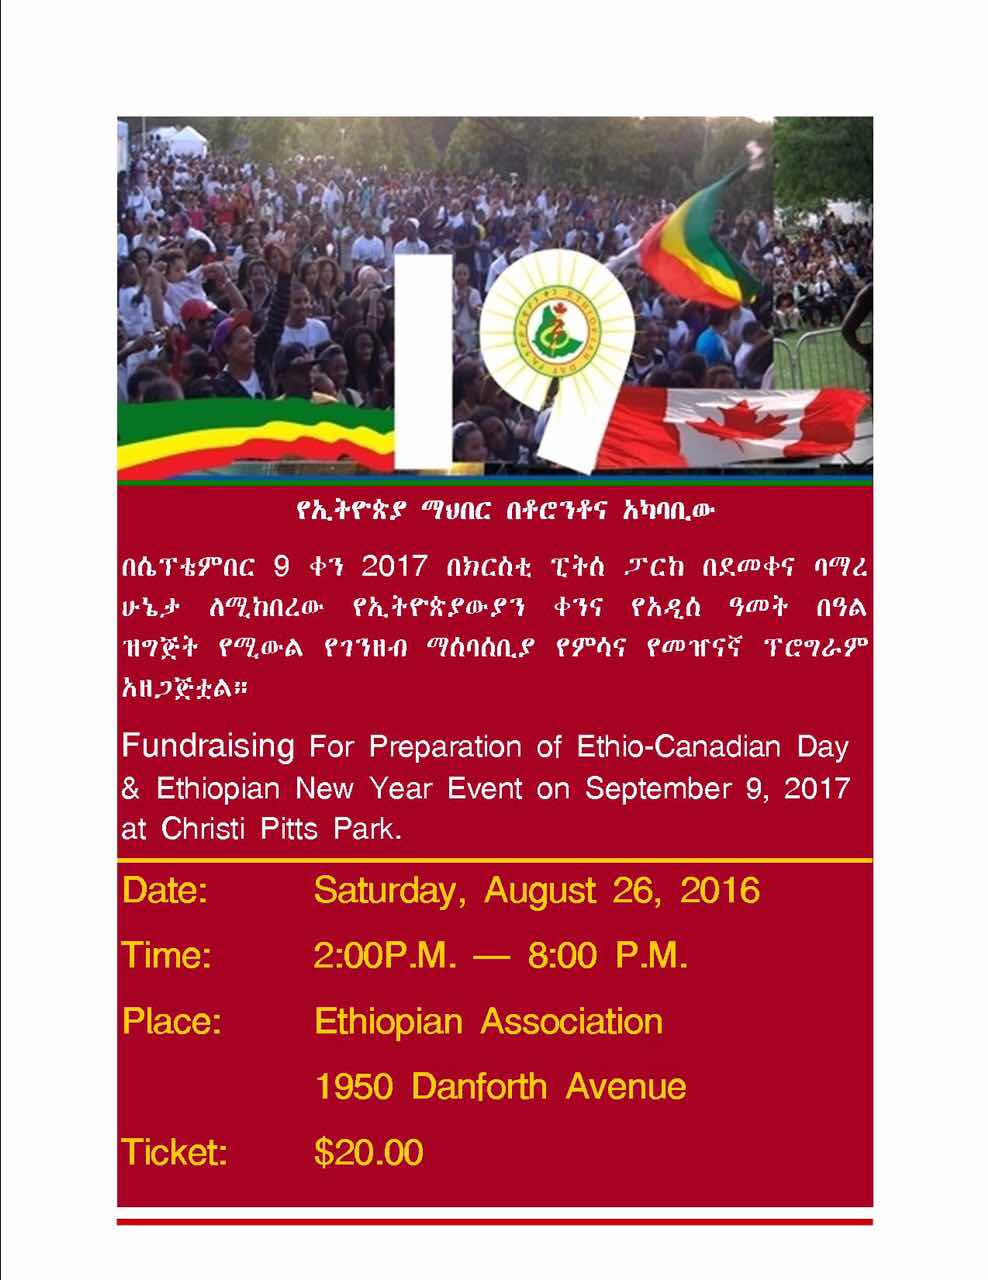 Ethiopian New Year in Toronto will be celebrated in Toronto on